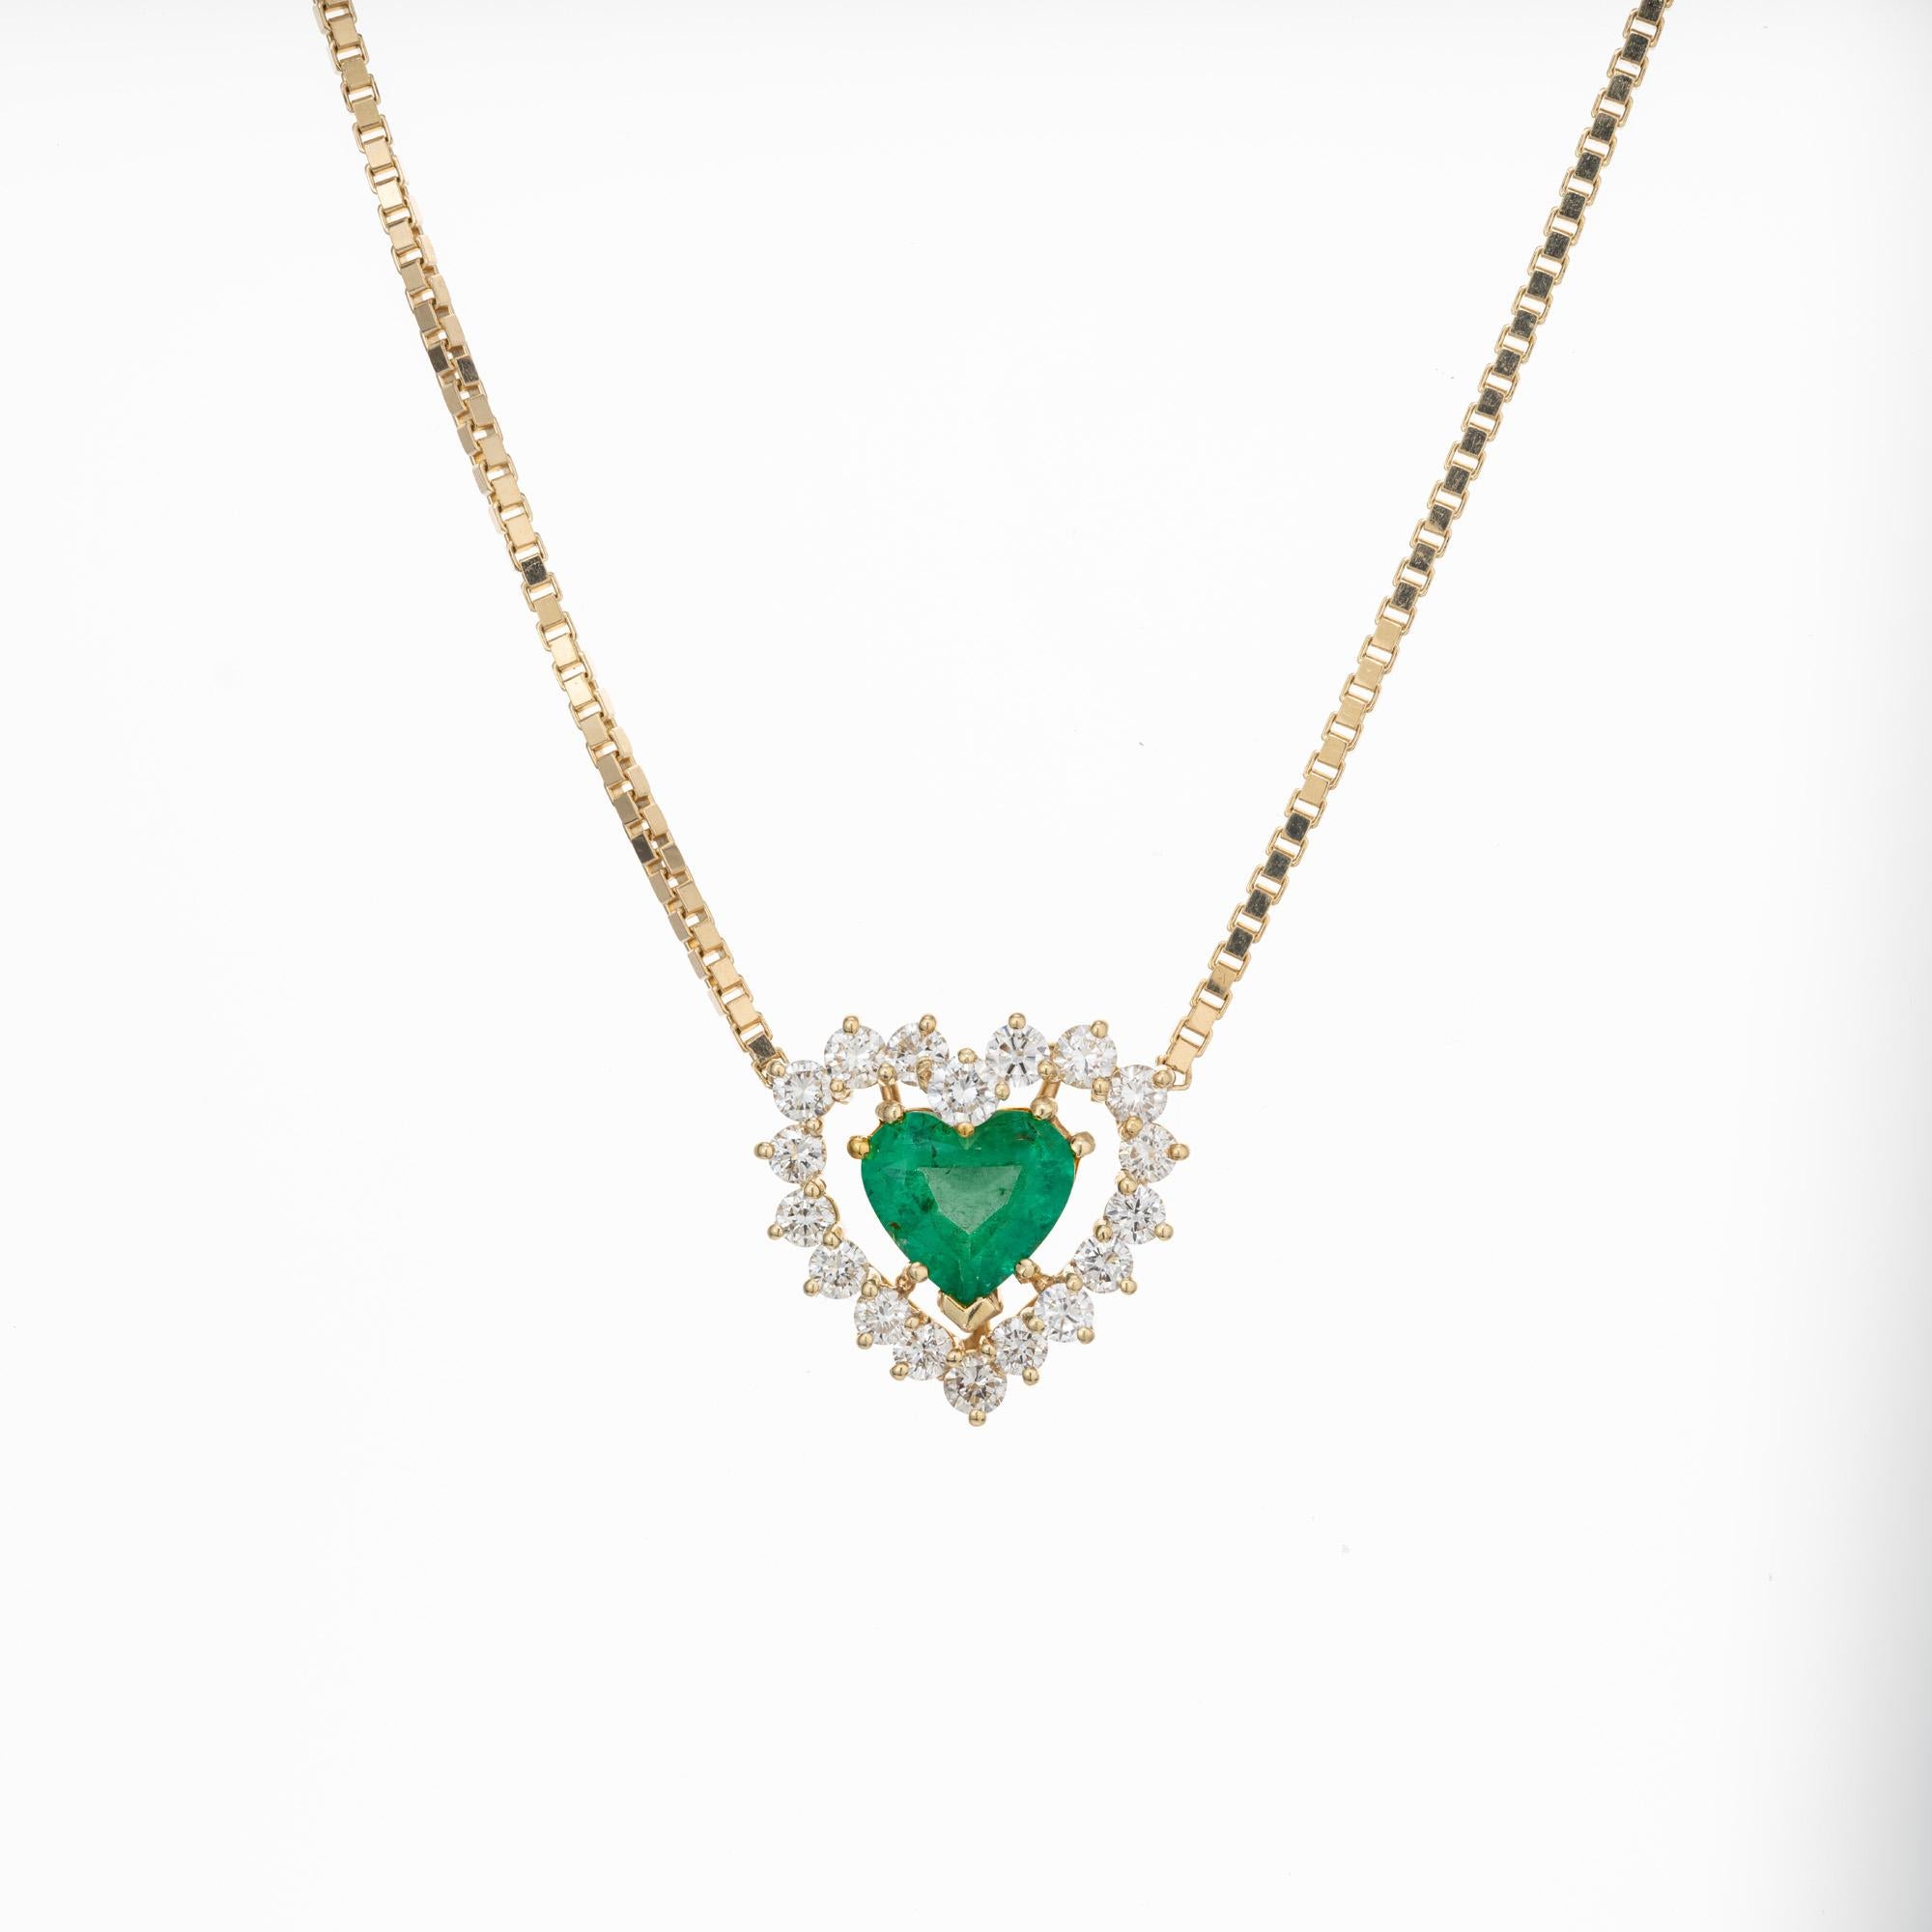 Emerald heart and diamond necklace pendant. GIA Certified 1.81 carat natural heart shaped emerald set in 18k yellow gold setting with a halo of 18 round brilliant cut diamonds totaling 1.10cts. 18k yellow gold adjustable box chain that can be worn